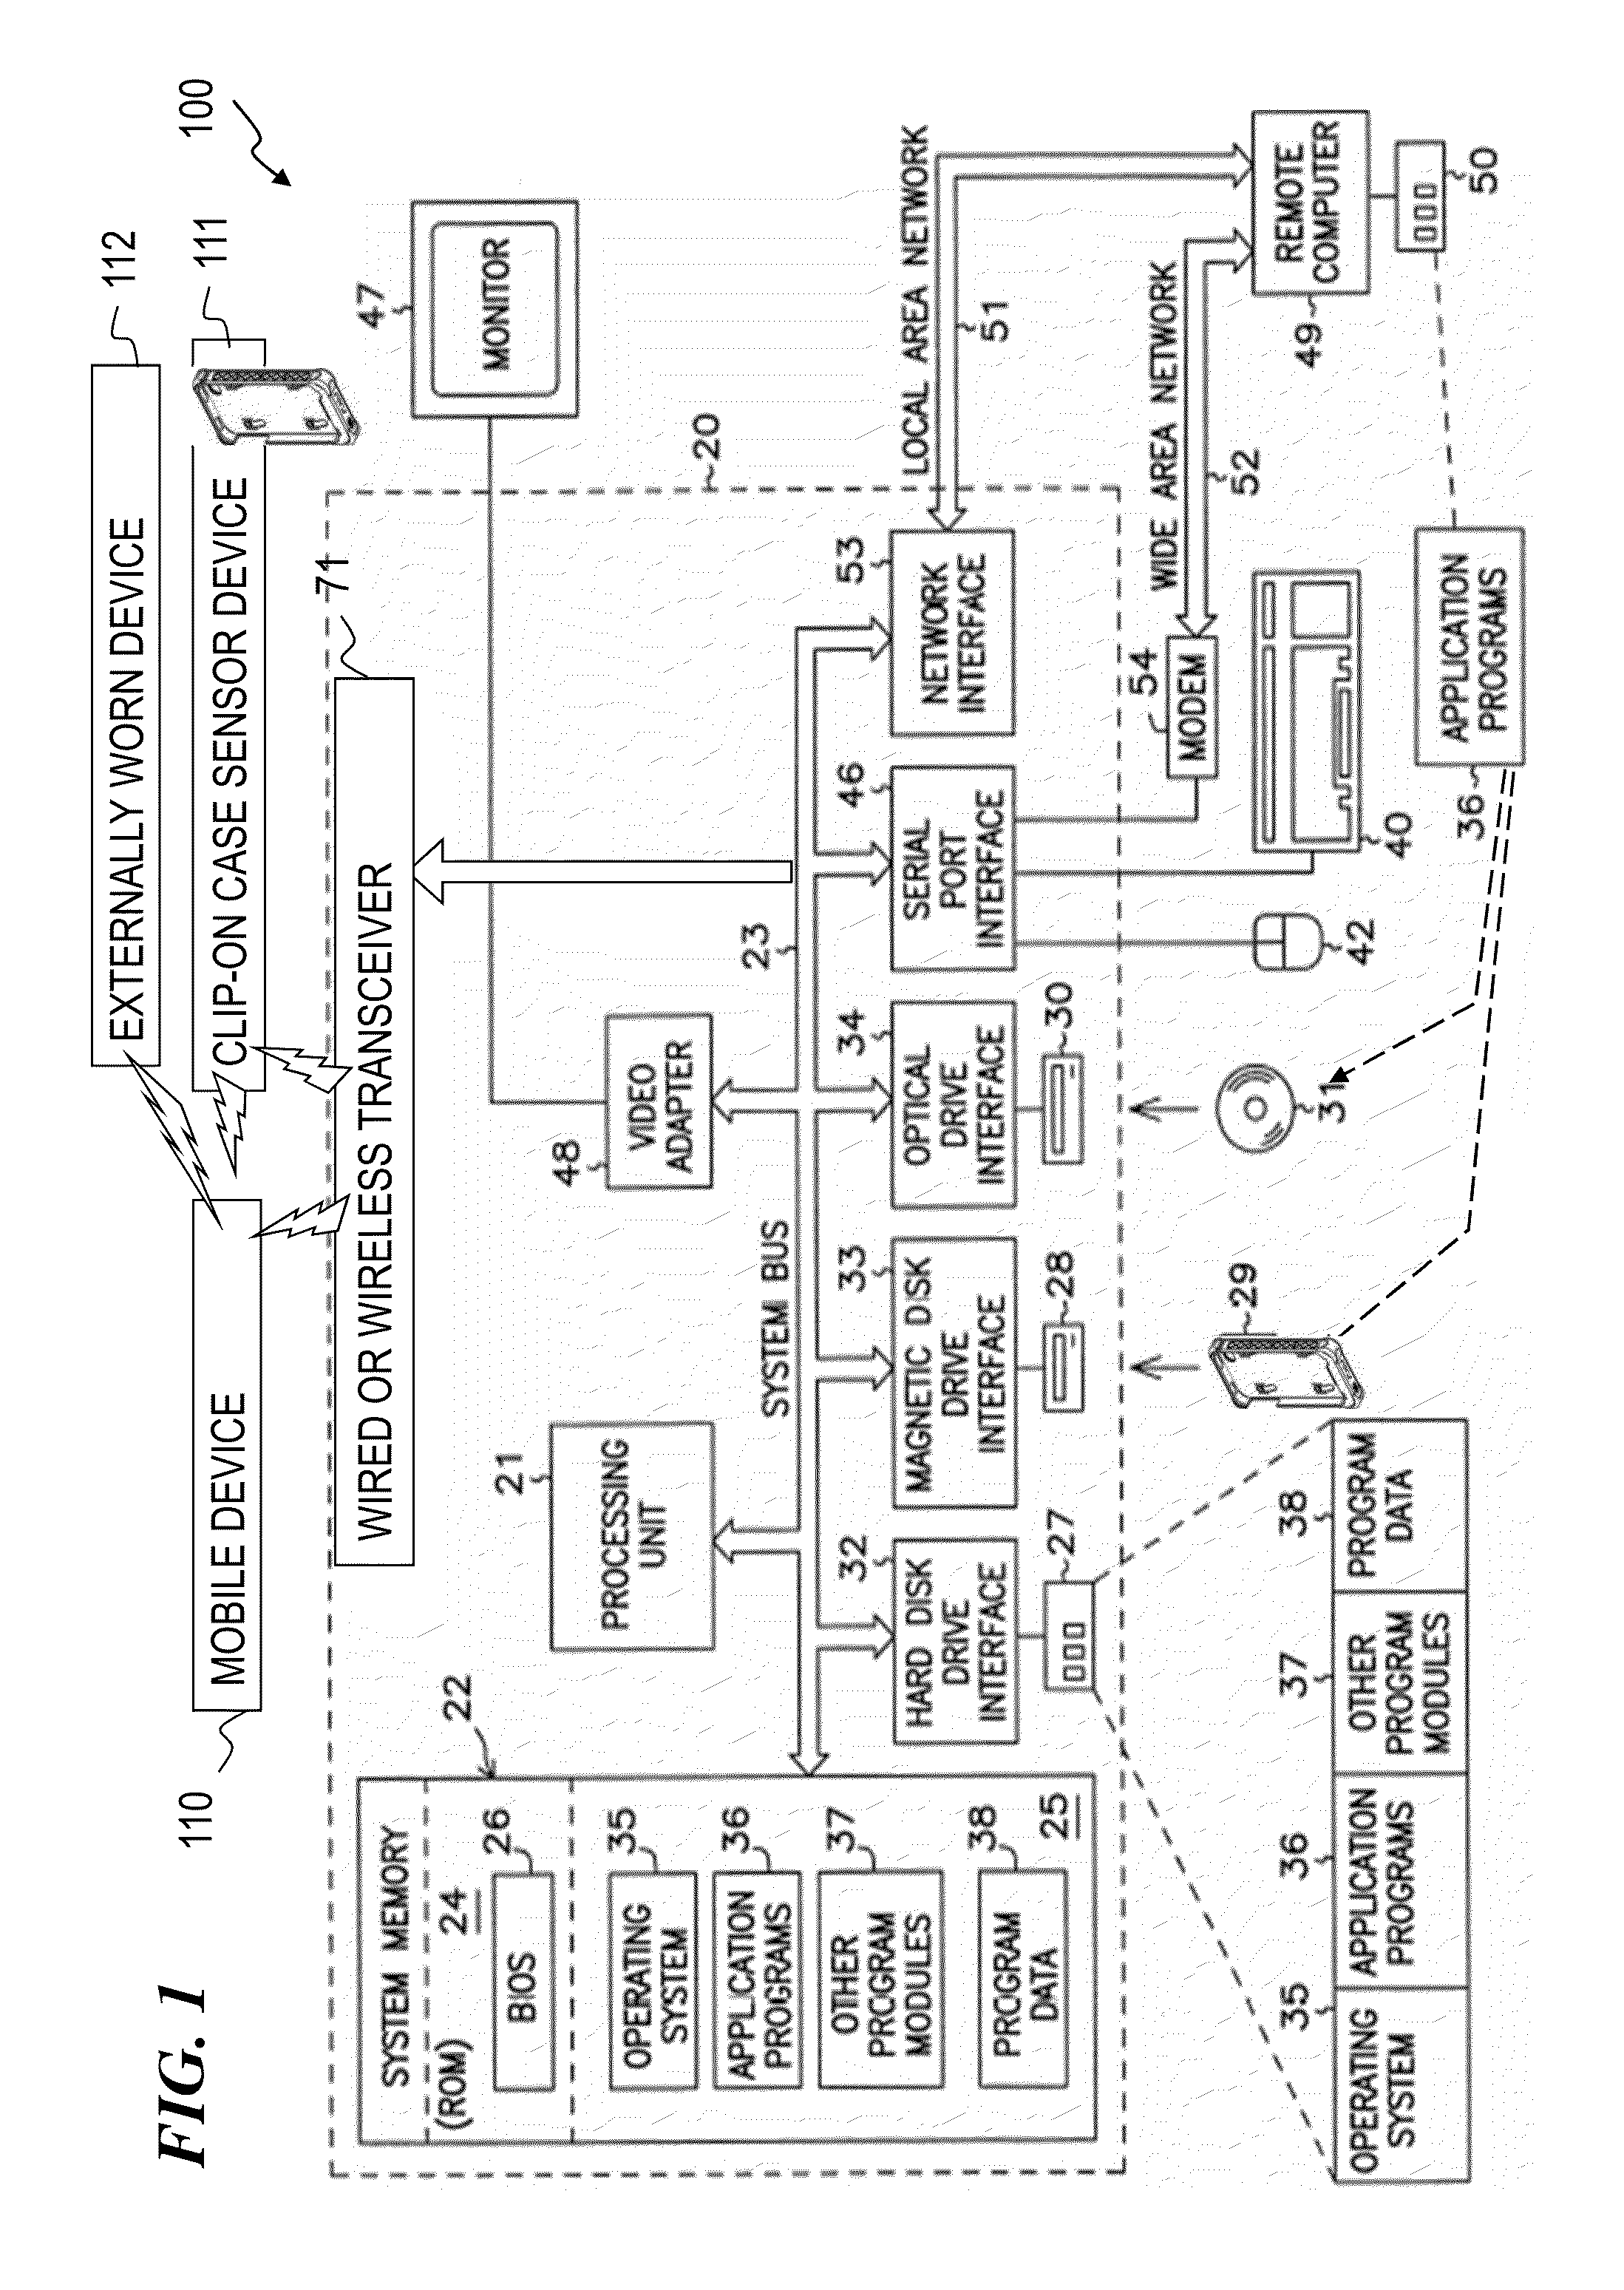 Enhanced detachable sensory-interface device for a wireless personal communication device and method